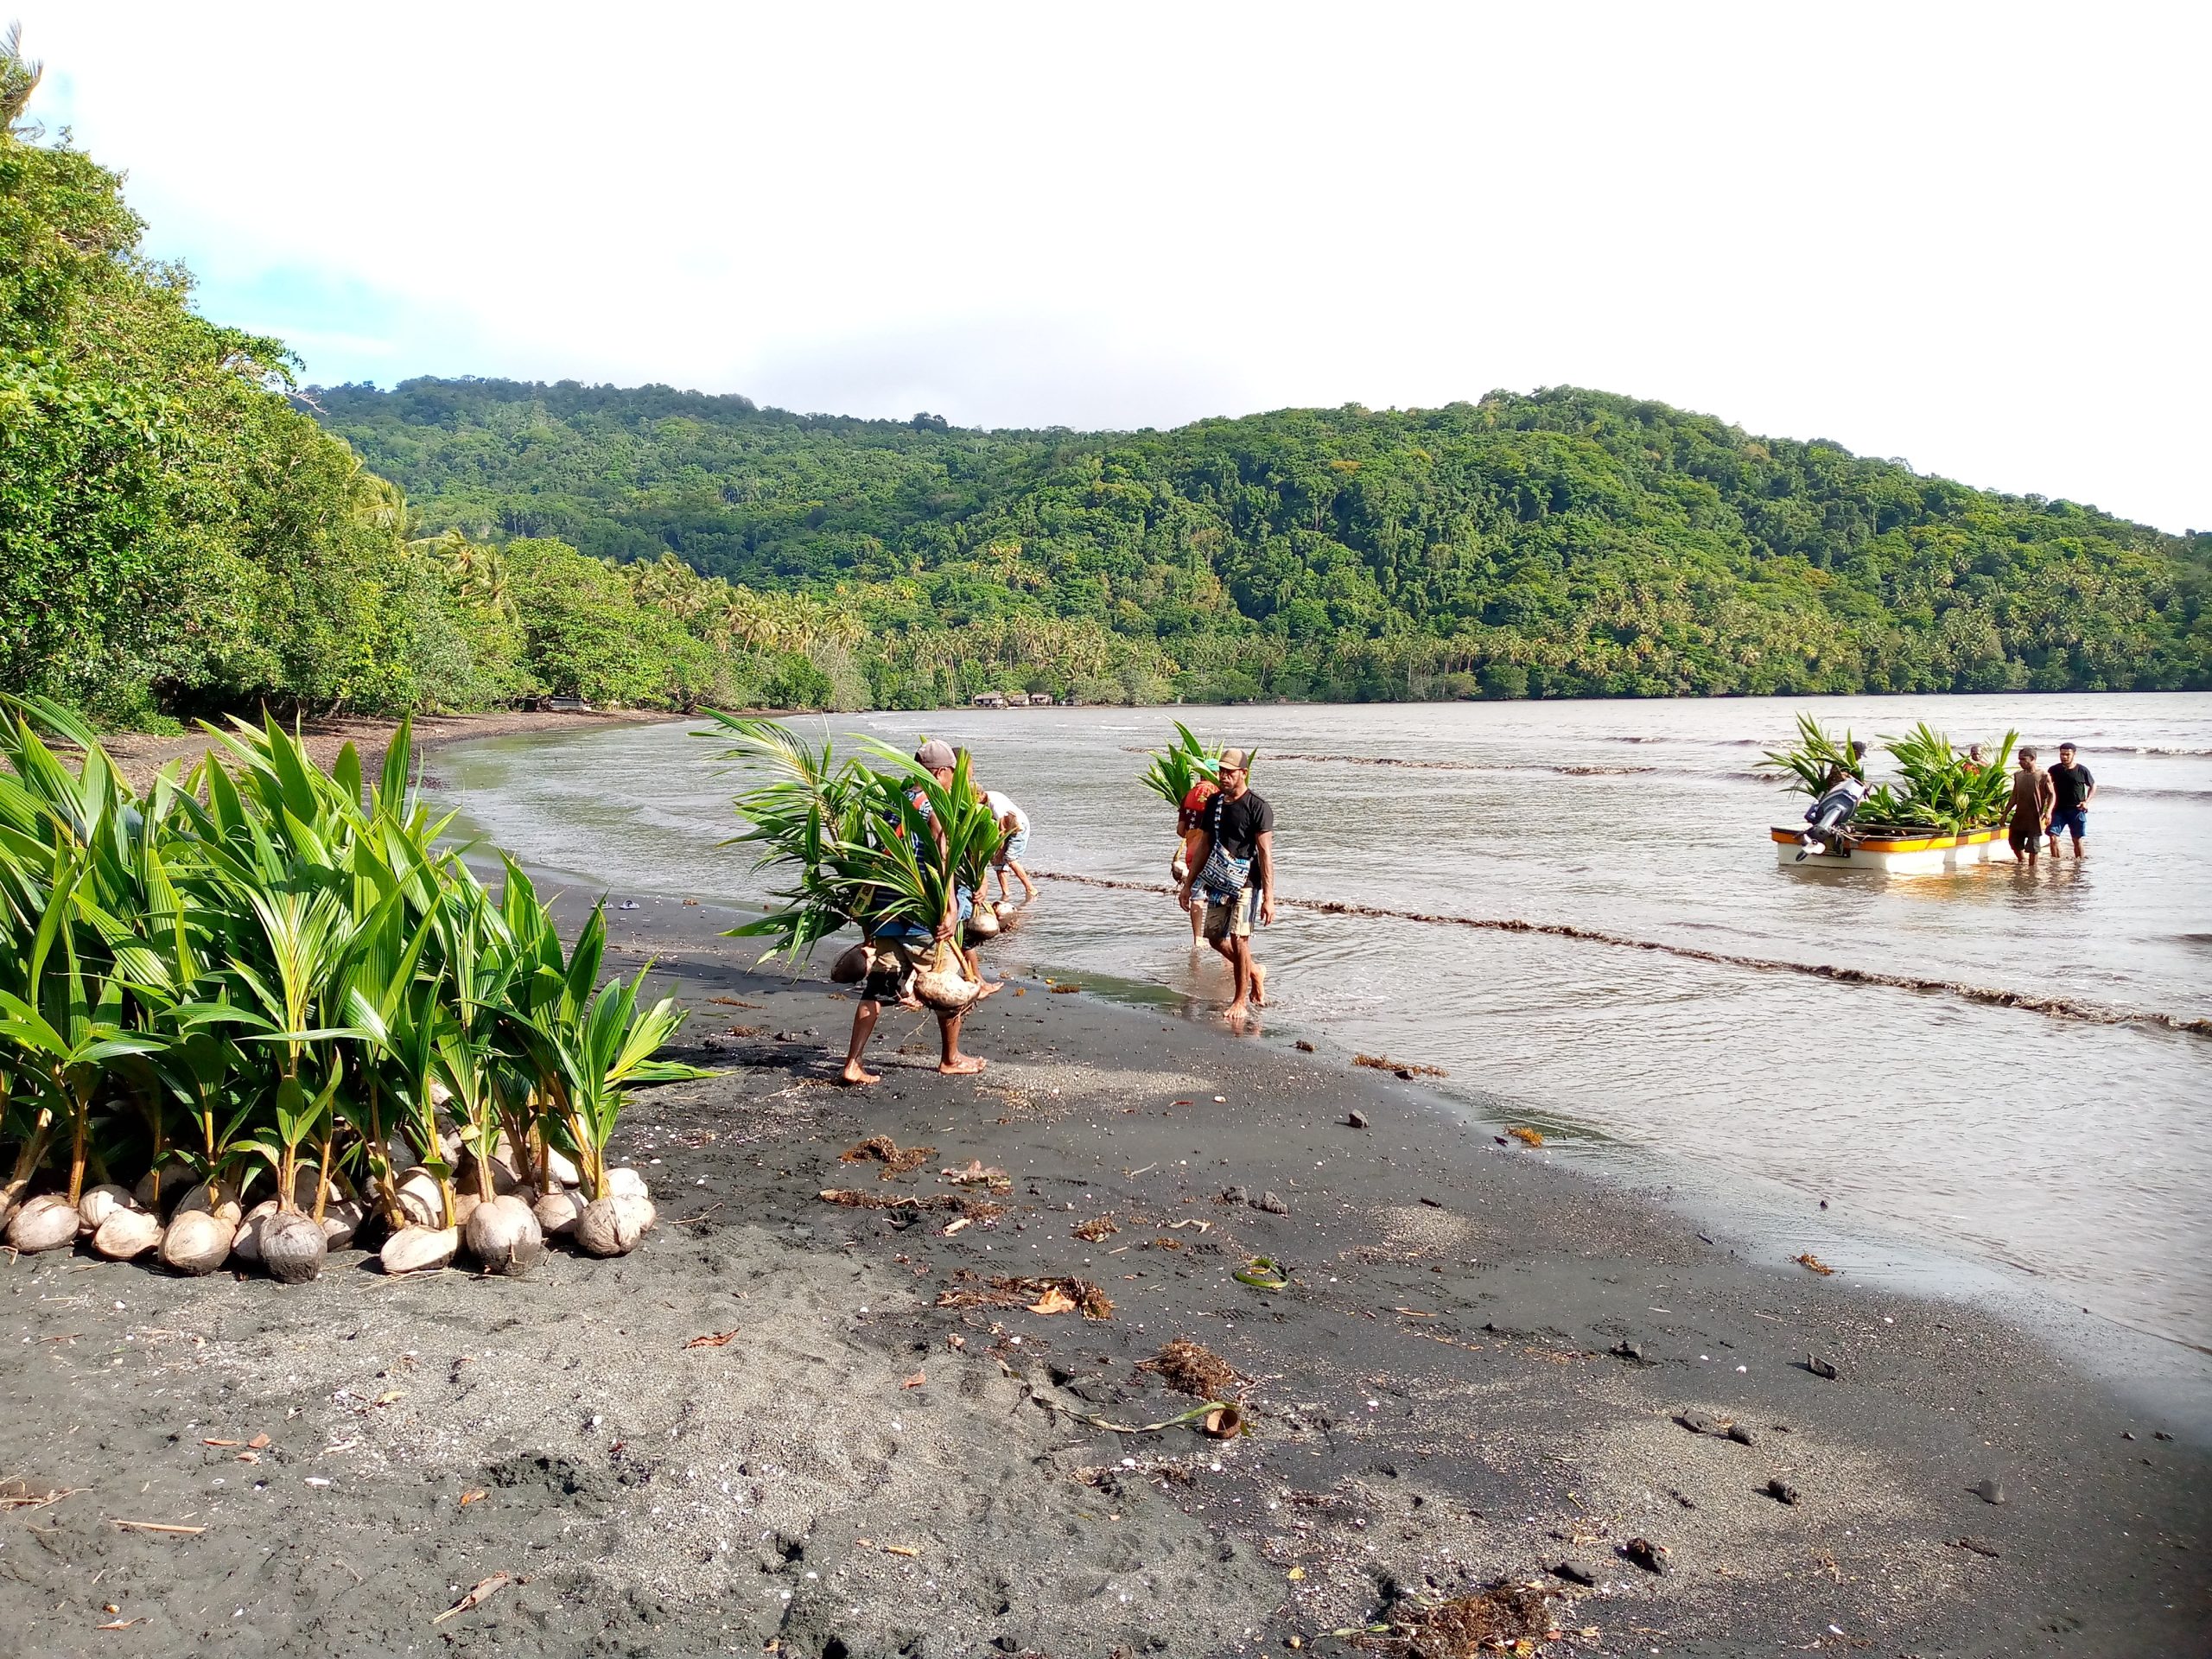 The Wabumari community in Papua New Guinea uprooting and distributing their first lot of coconut seedlings from boat to land.